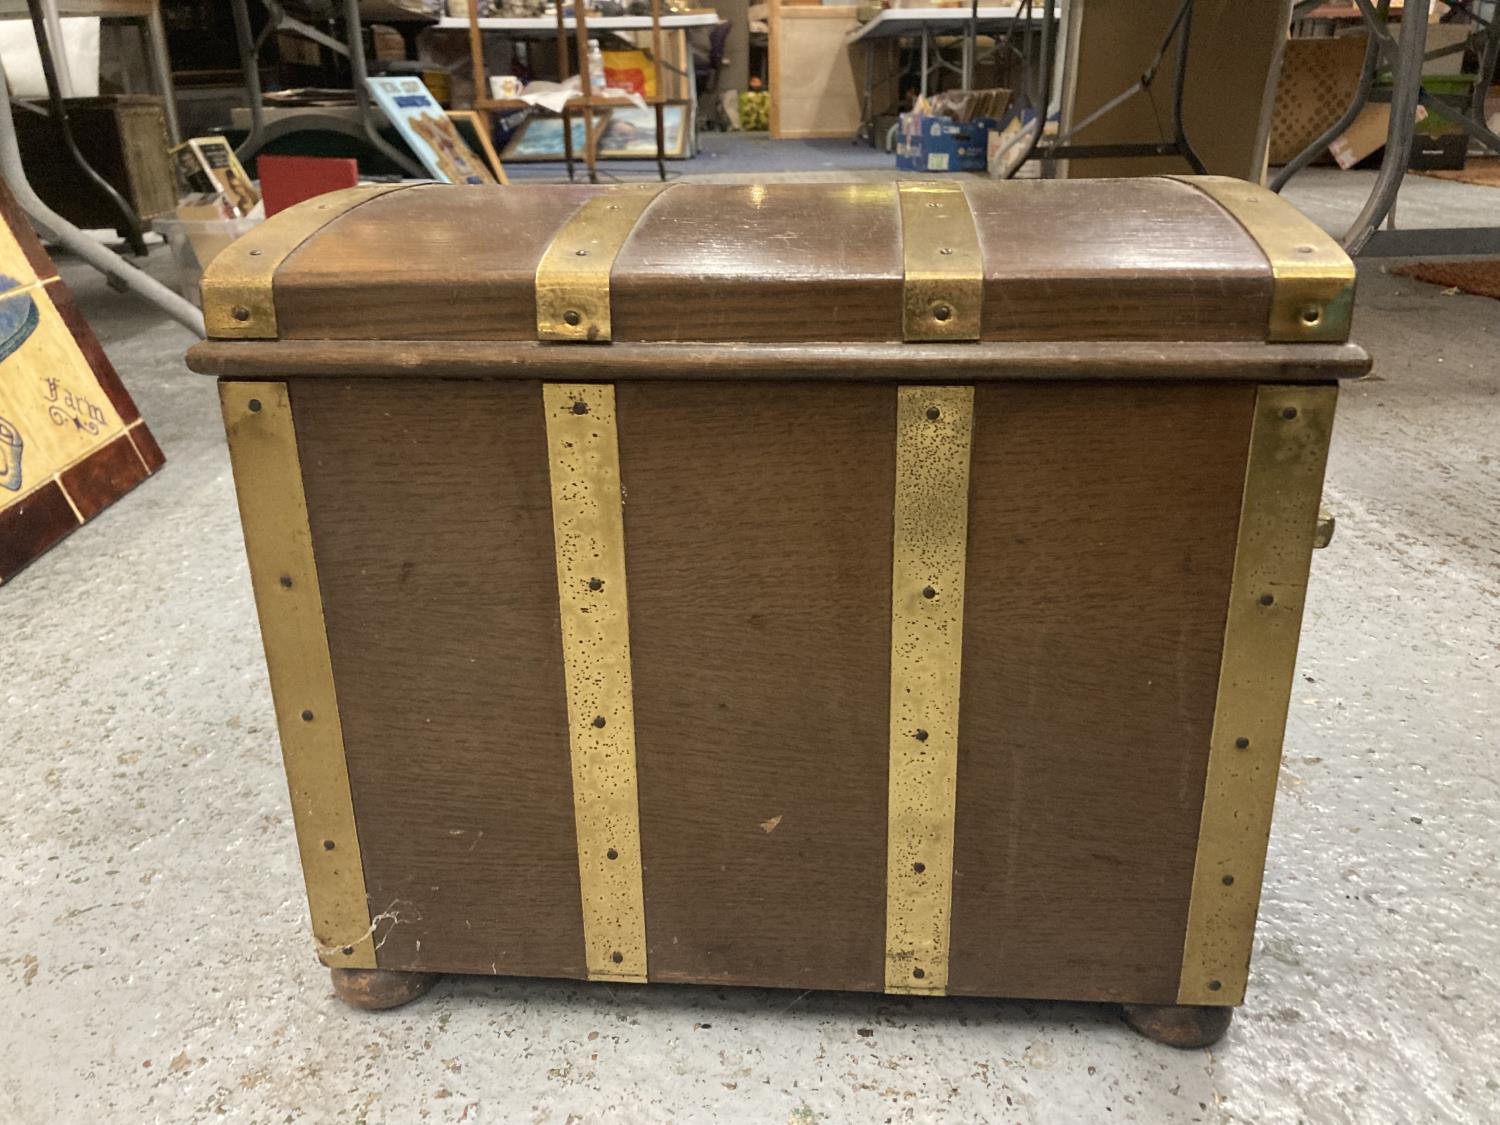 A VINTAGE MAHOGANY COAL BOX WITH INNER TIN LINING, BRASS BANDING AND HANDLES ON BUN FEET HEIGHT 31.